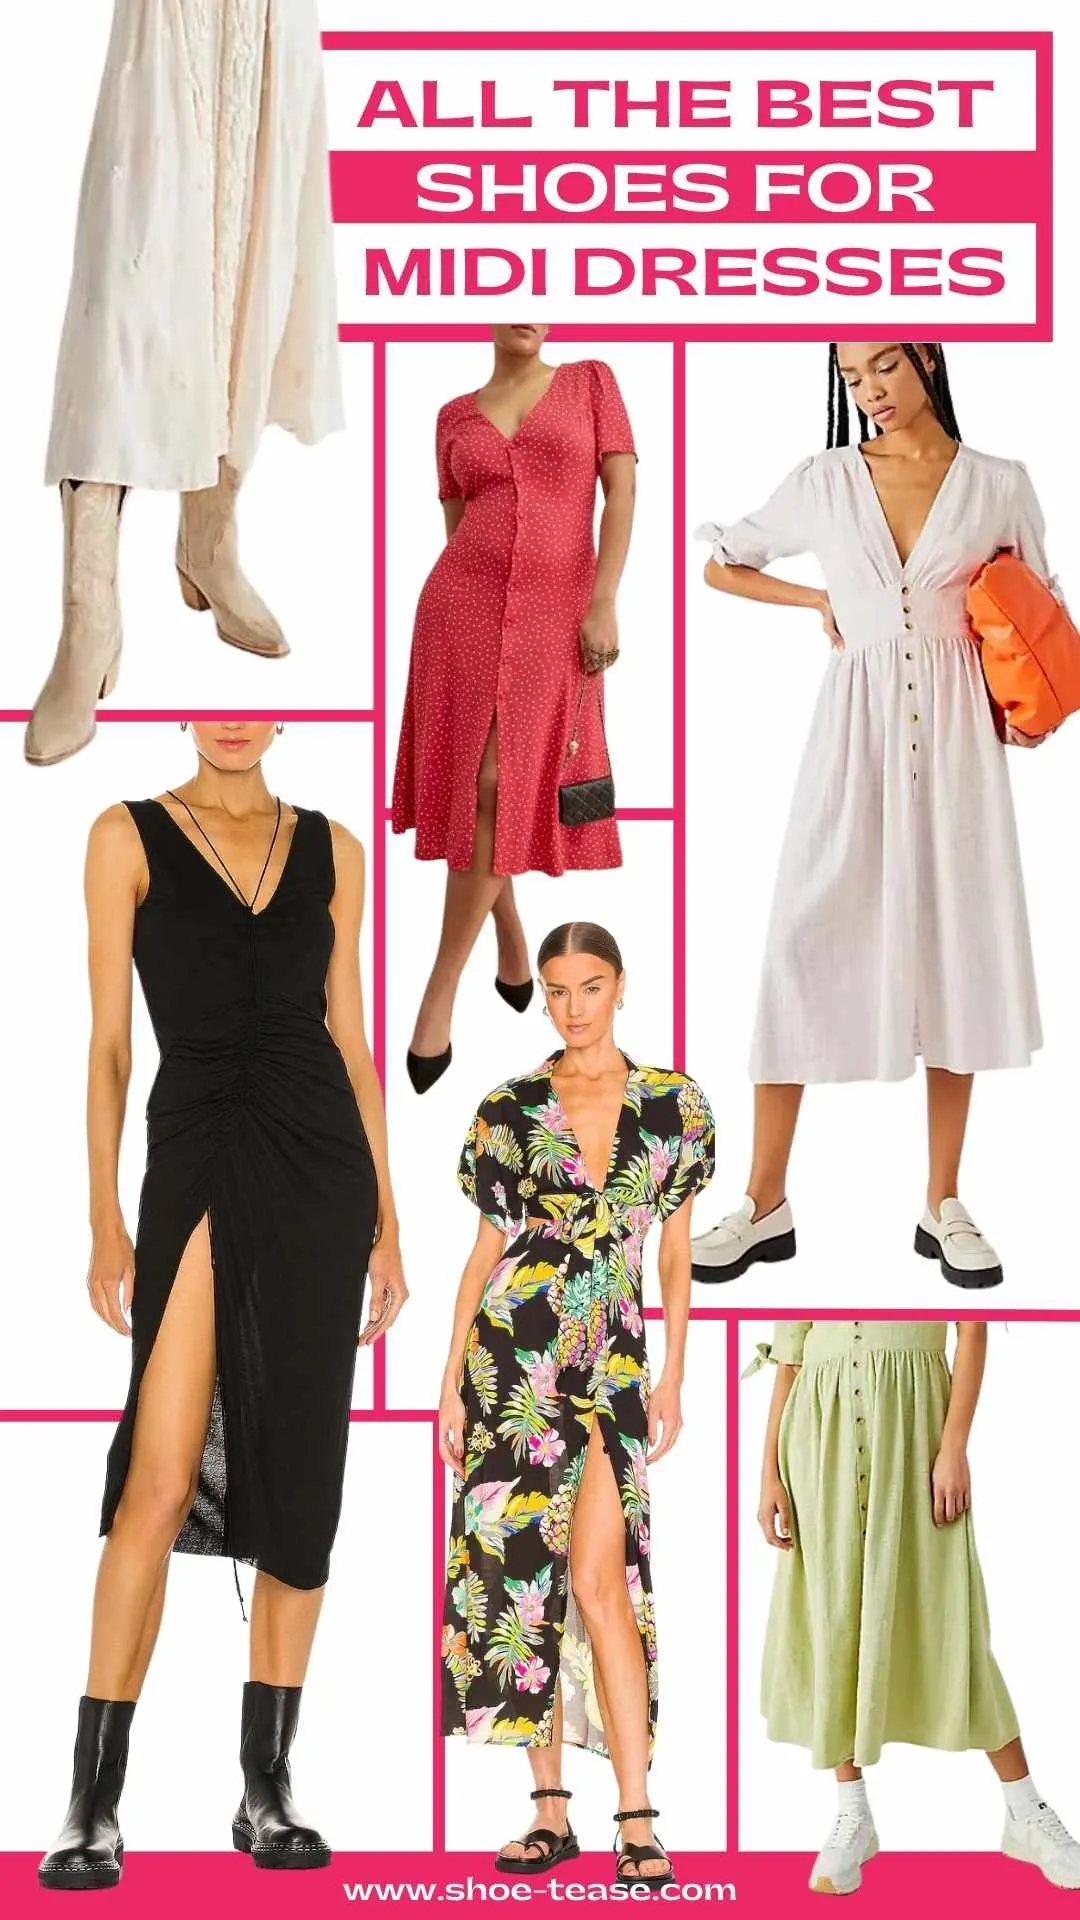 Collage of 6 women wearing different shoes for midi dresses.